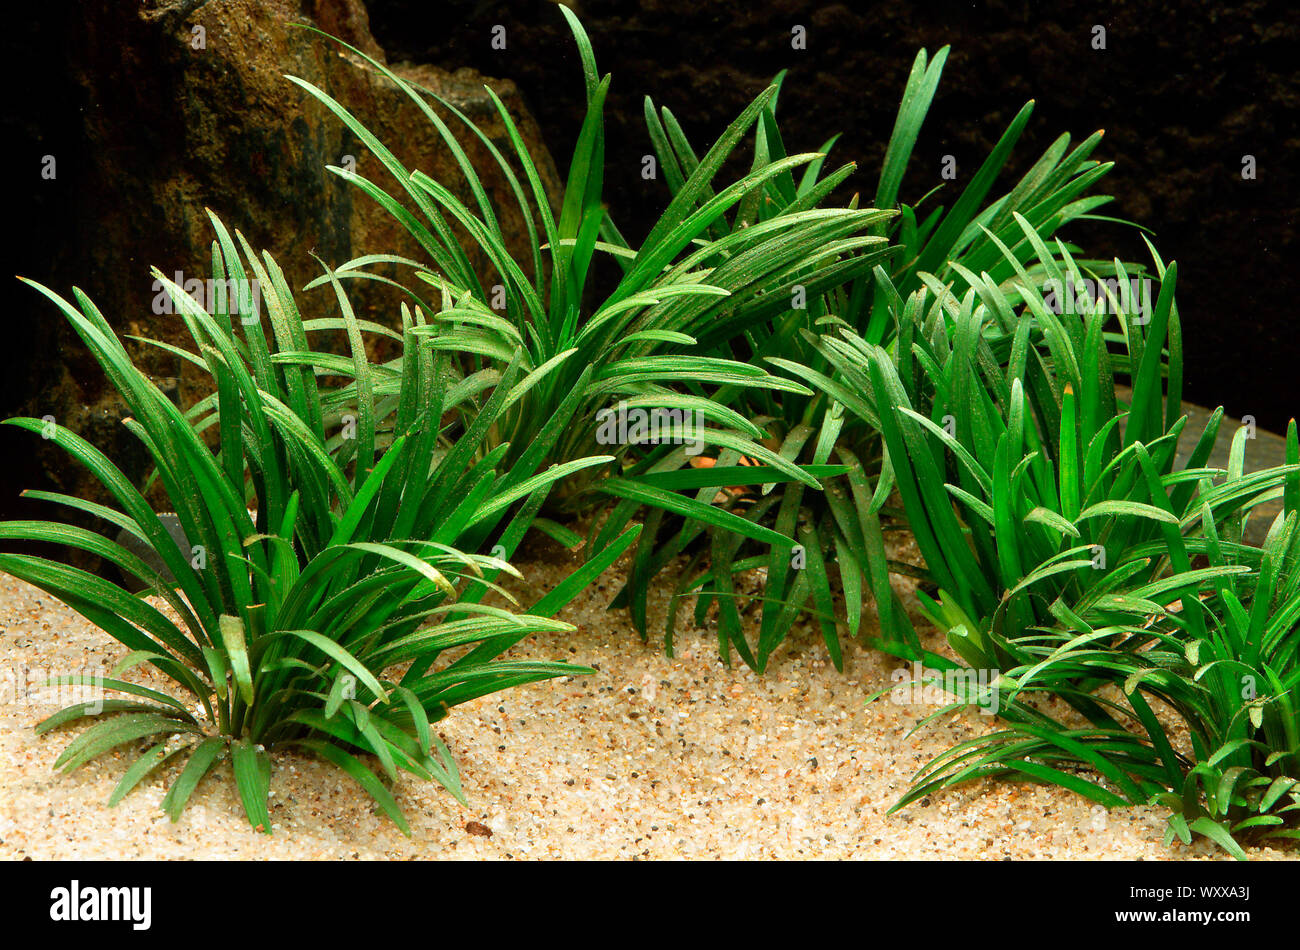 Dwarf lilyturf 'Kyoto Dwarf' (Ophiopogon japonicus) in aquarium. Often sold as a decorative plant for freshwater aquaria, but it is not a true aquatic Stock Photo